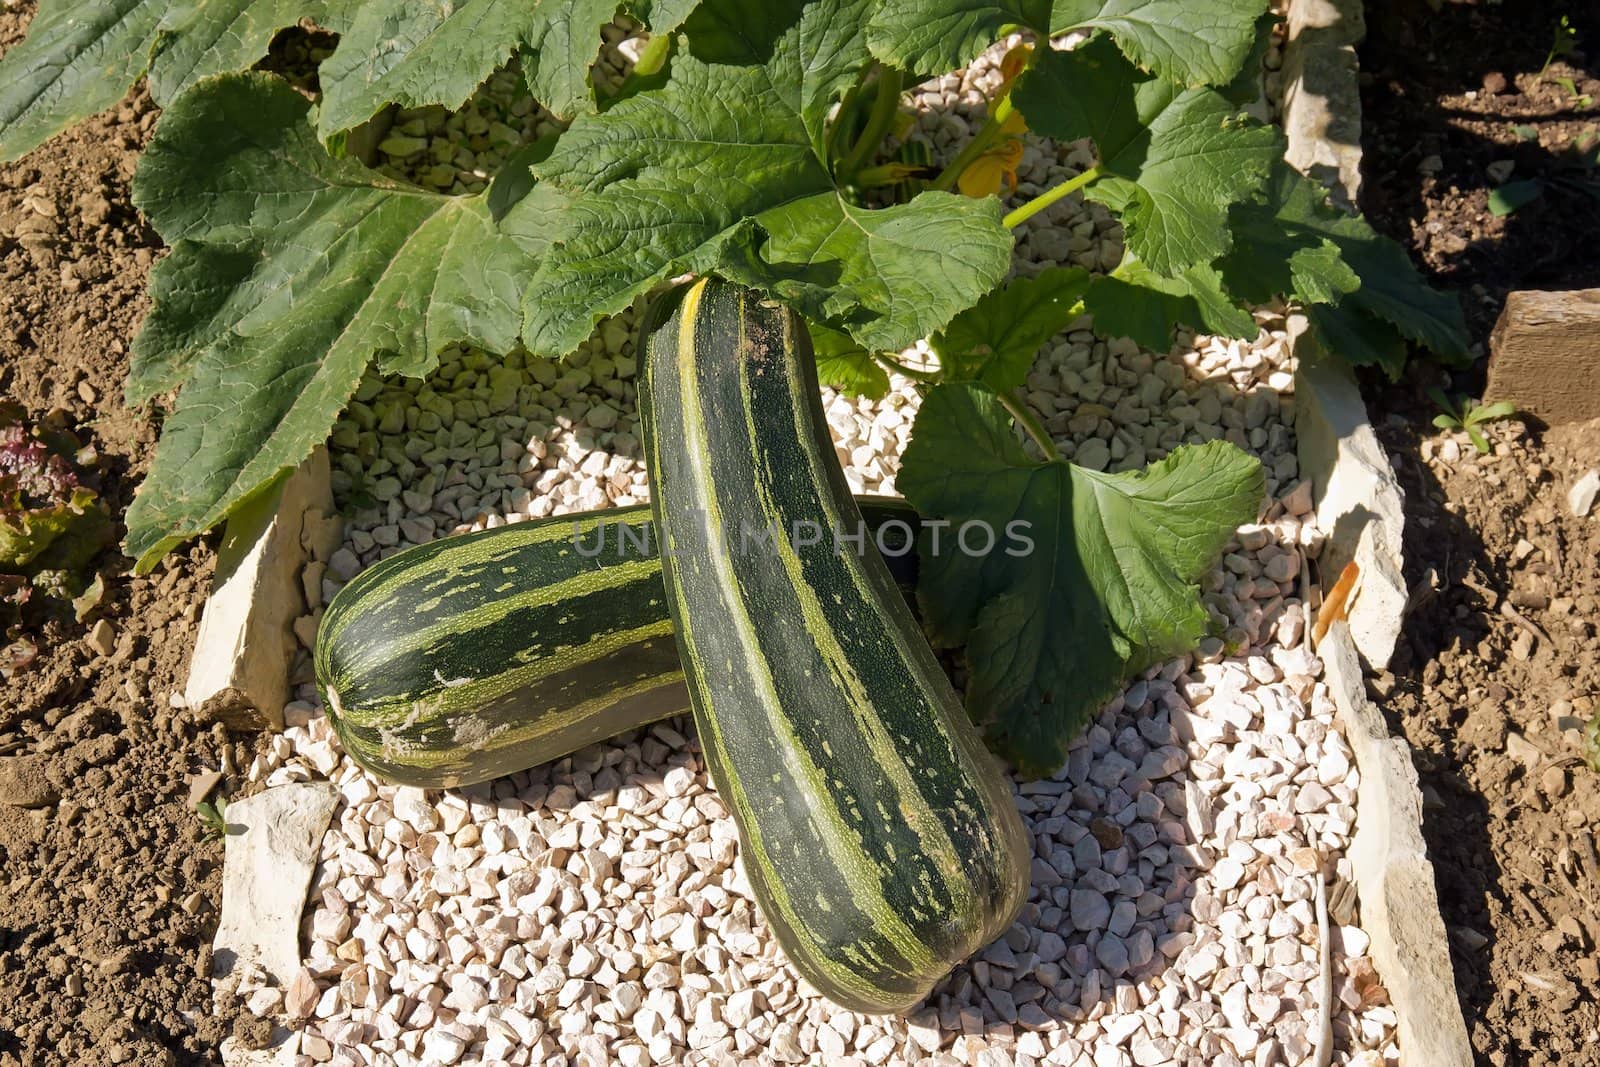 enormous zucchinis in a path of the garden by neko92vl